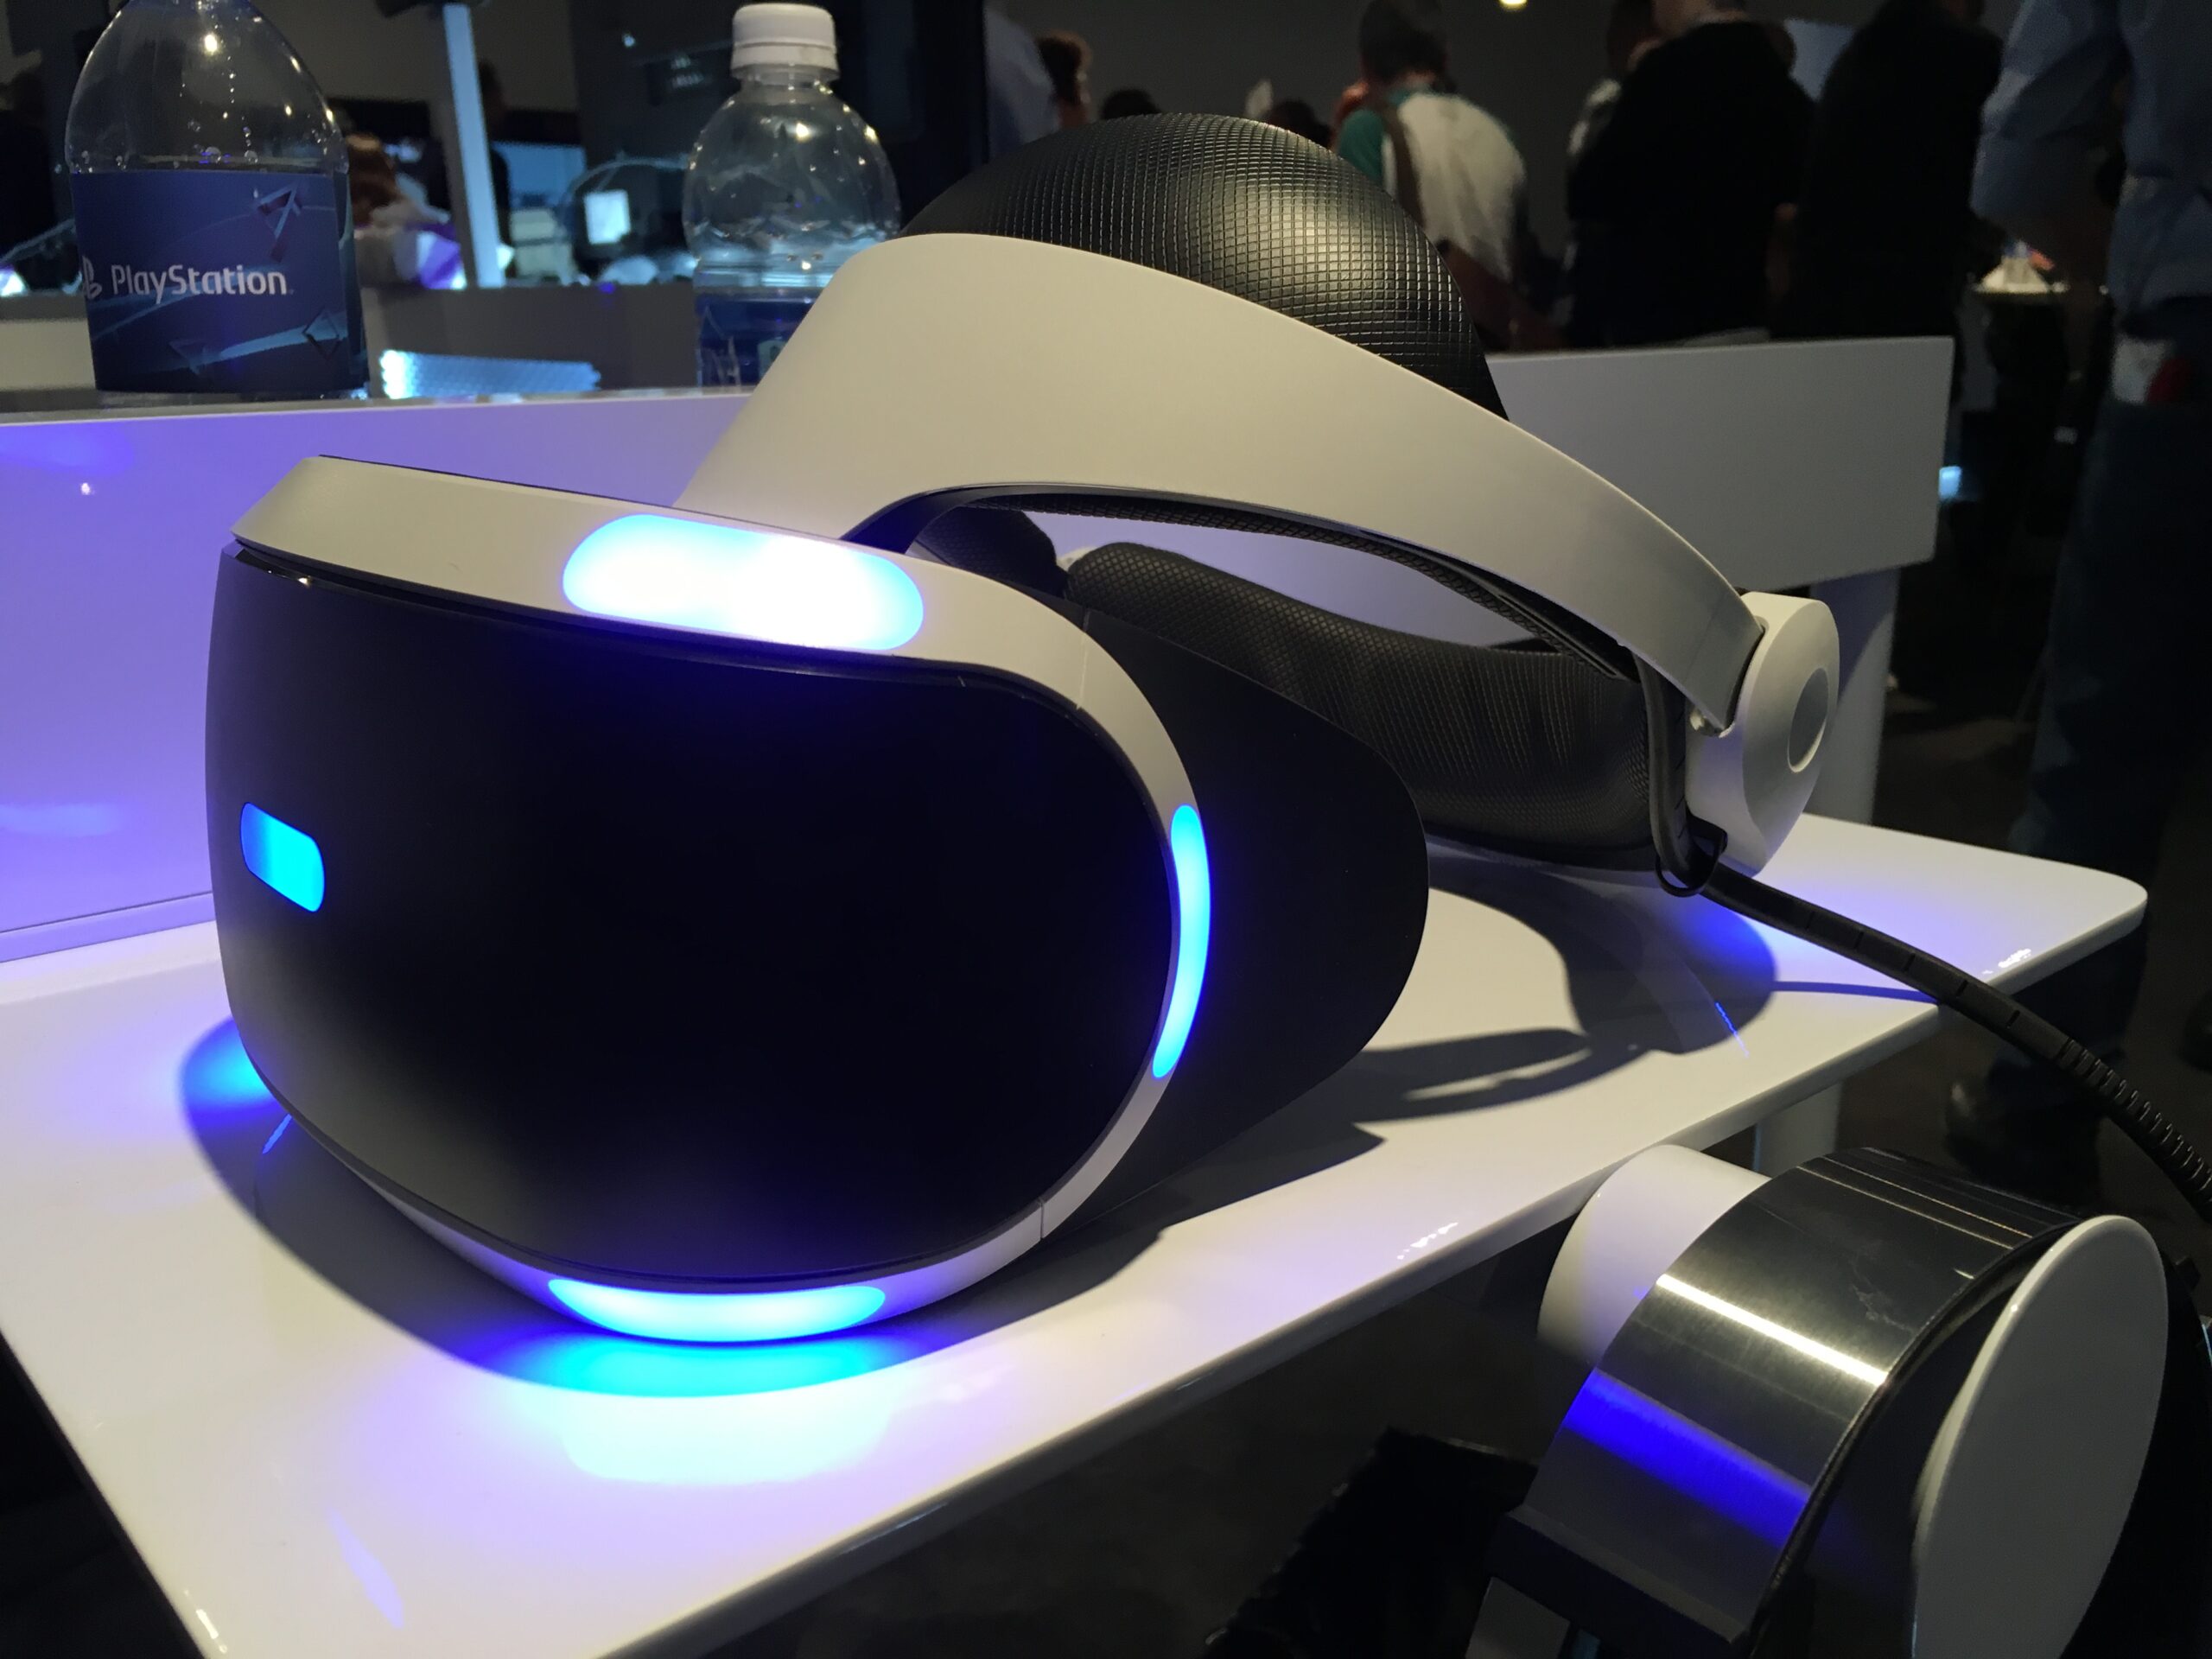 Playstation VR’s Launch In 2016 Is Important For Nintendo And Microsoft Gamers Too